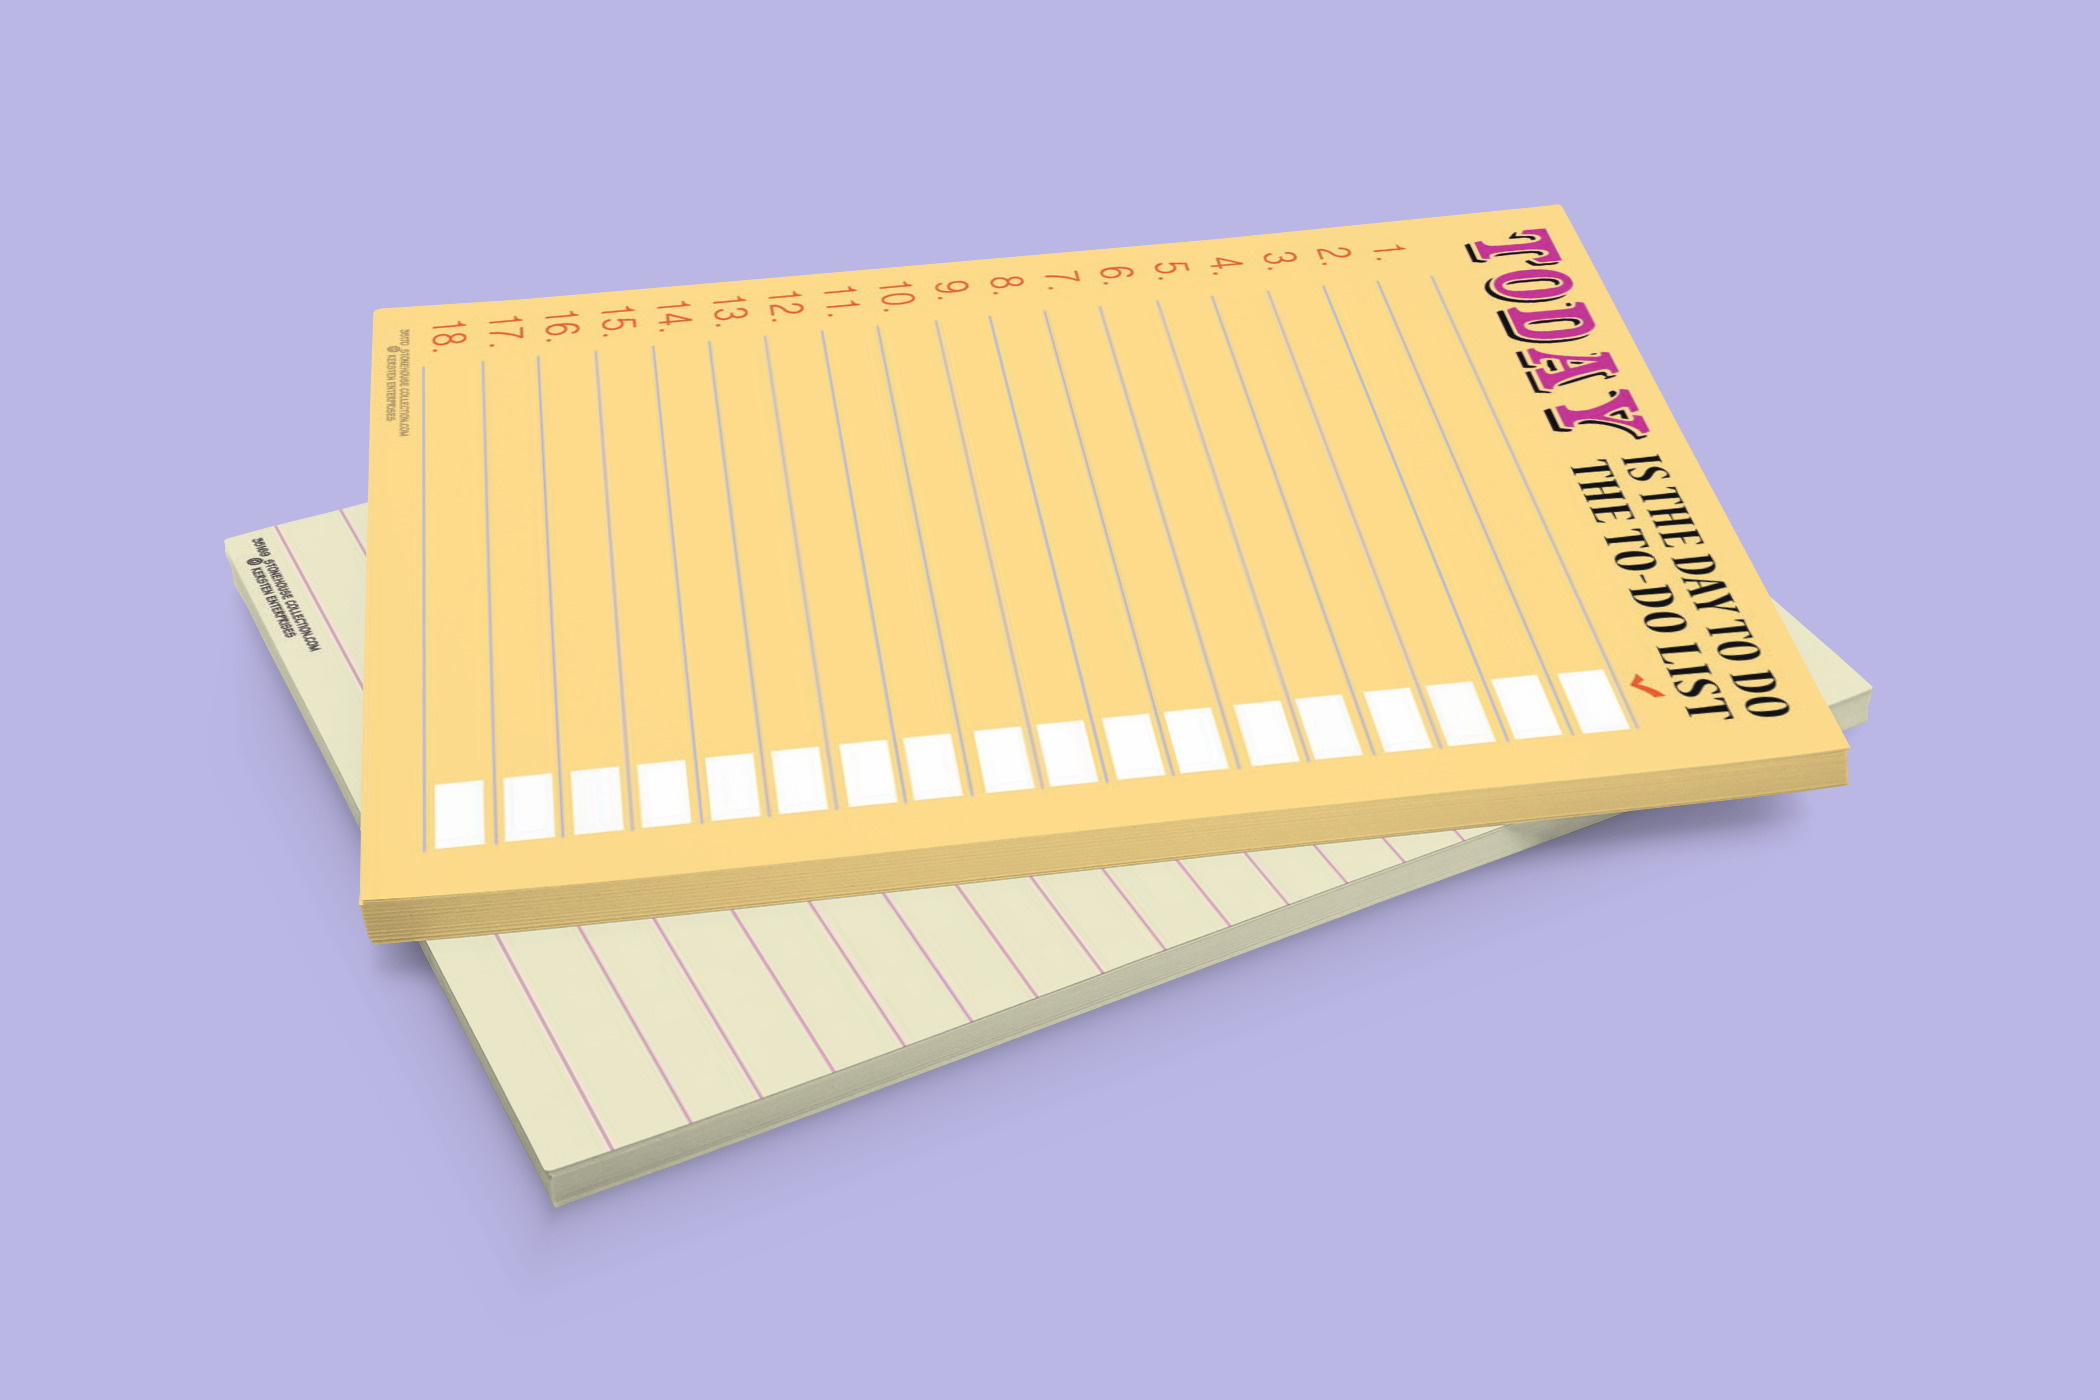 Funny Notepads Assorted Pack - 4 Novelty Notepads - Funny Office Supplies -  To Do List - 682 